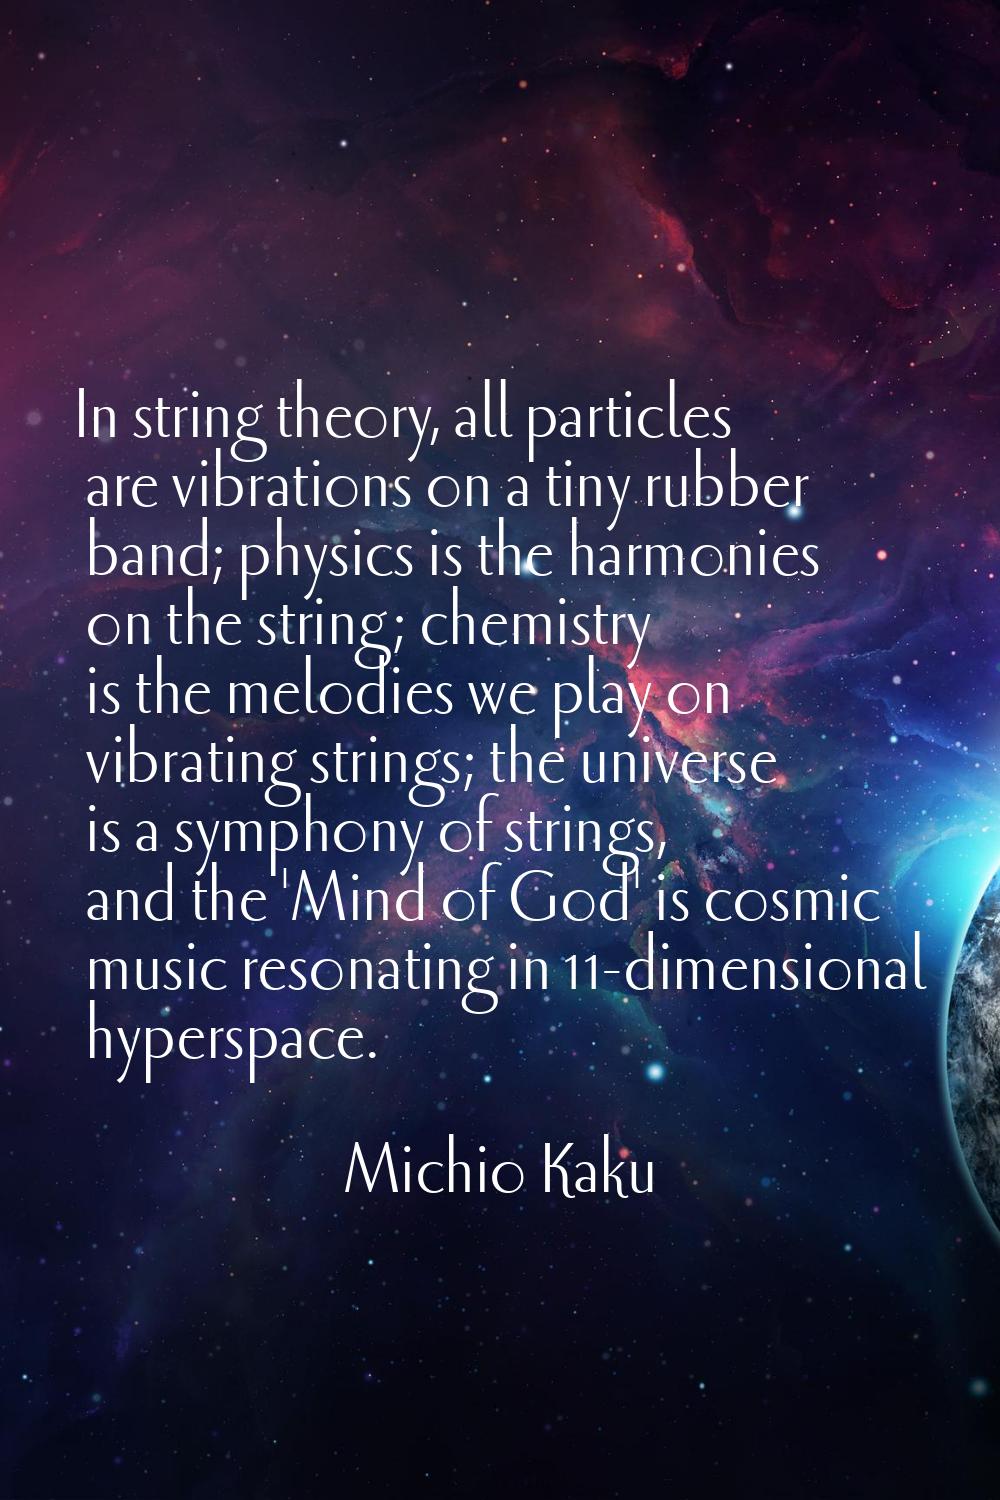 In string theory, all particles are vibrations on a tiny rubber band; physics is the harmonies on t